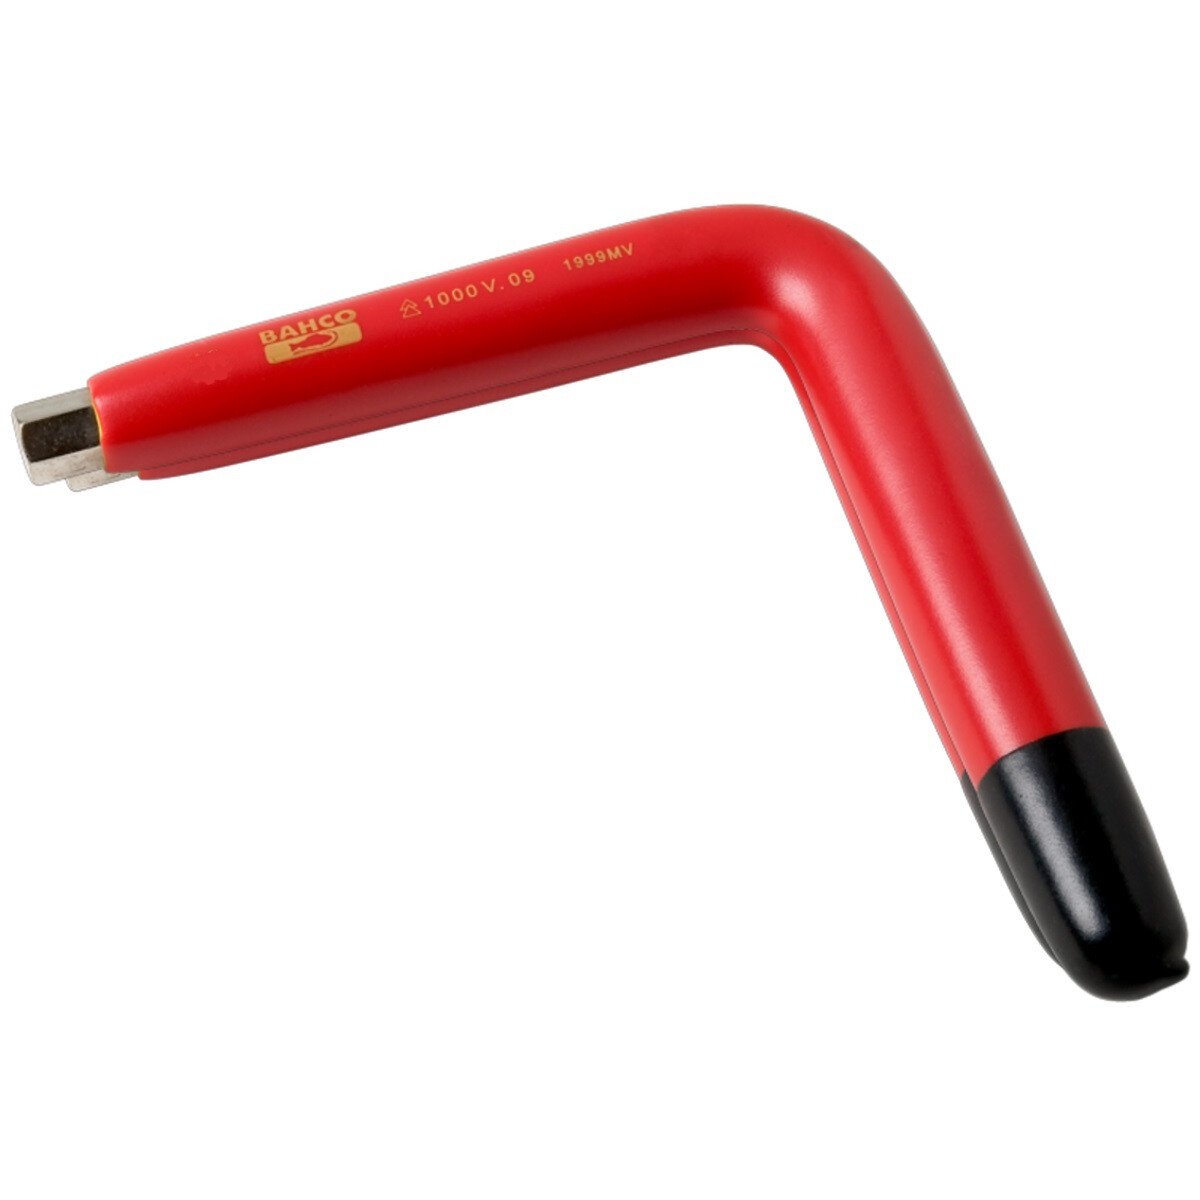 Bahco 1999MV-9 Insulated Hex Key 9mm